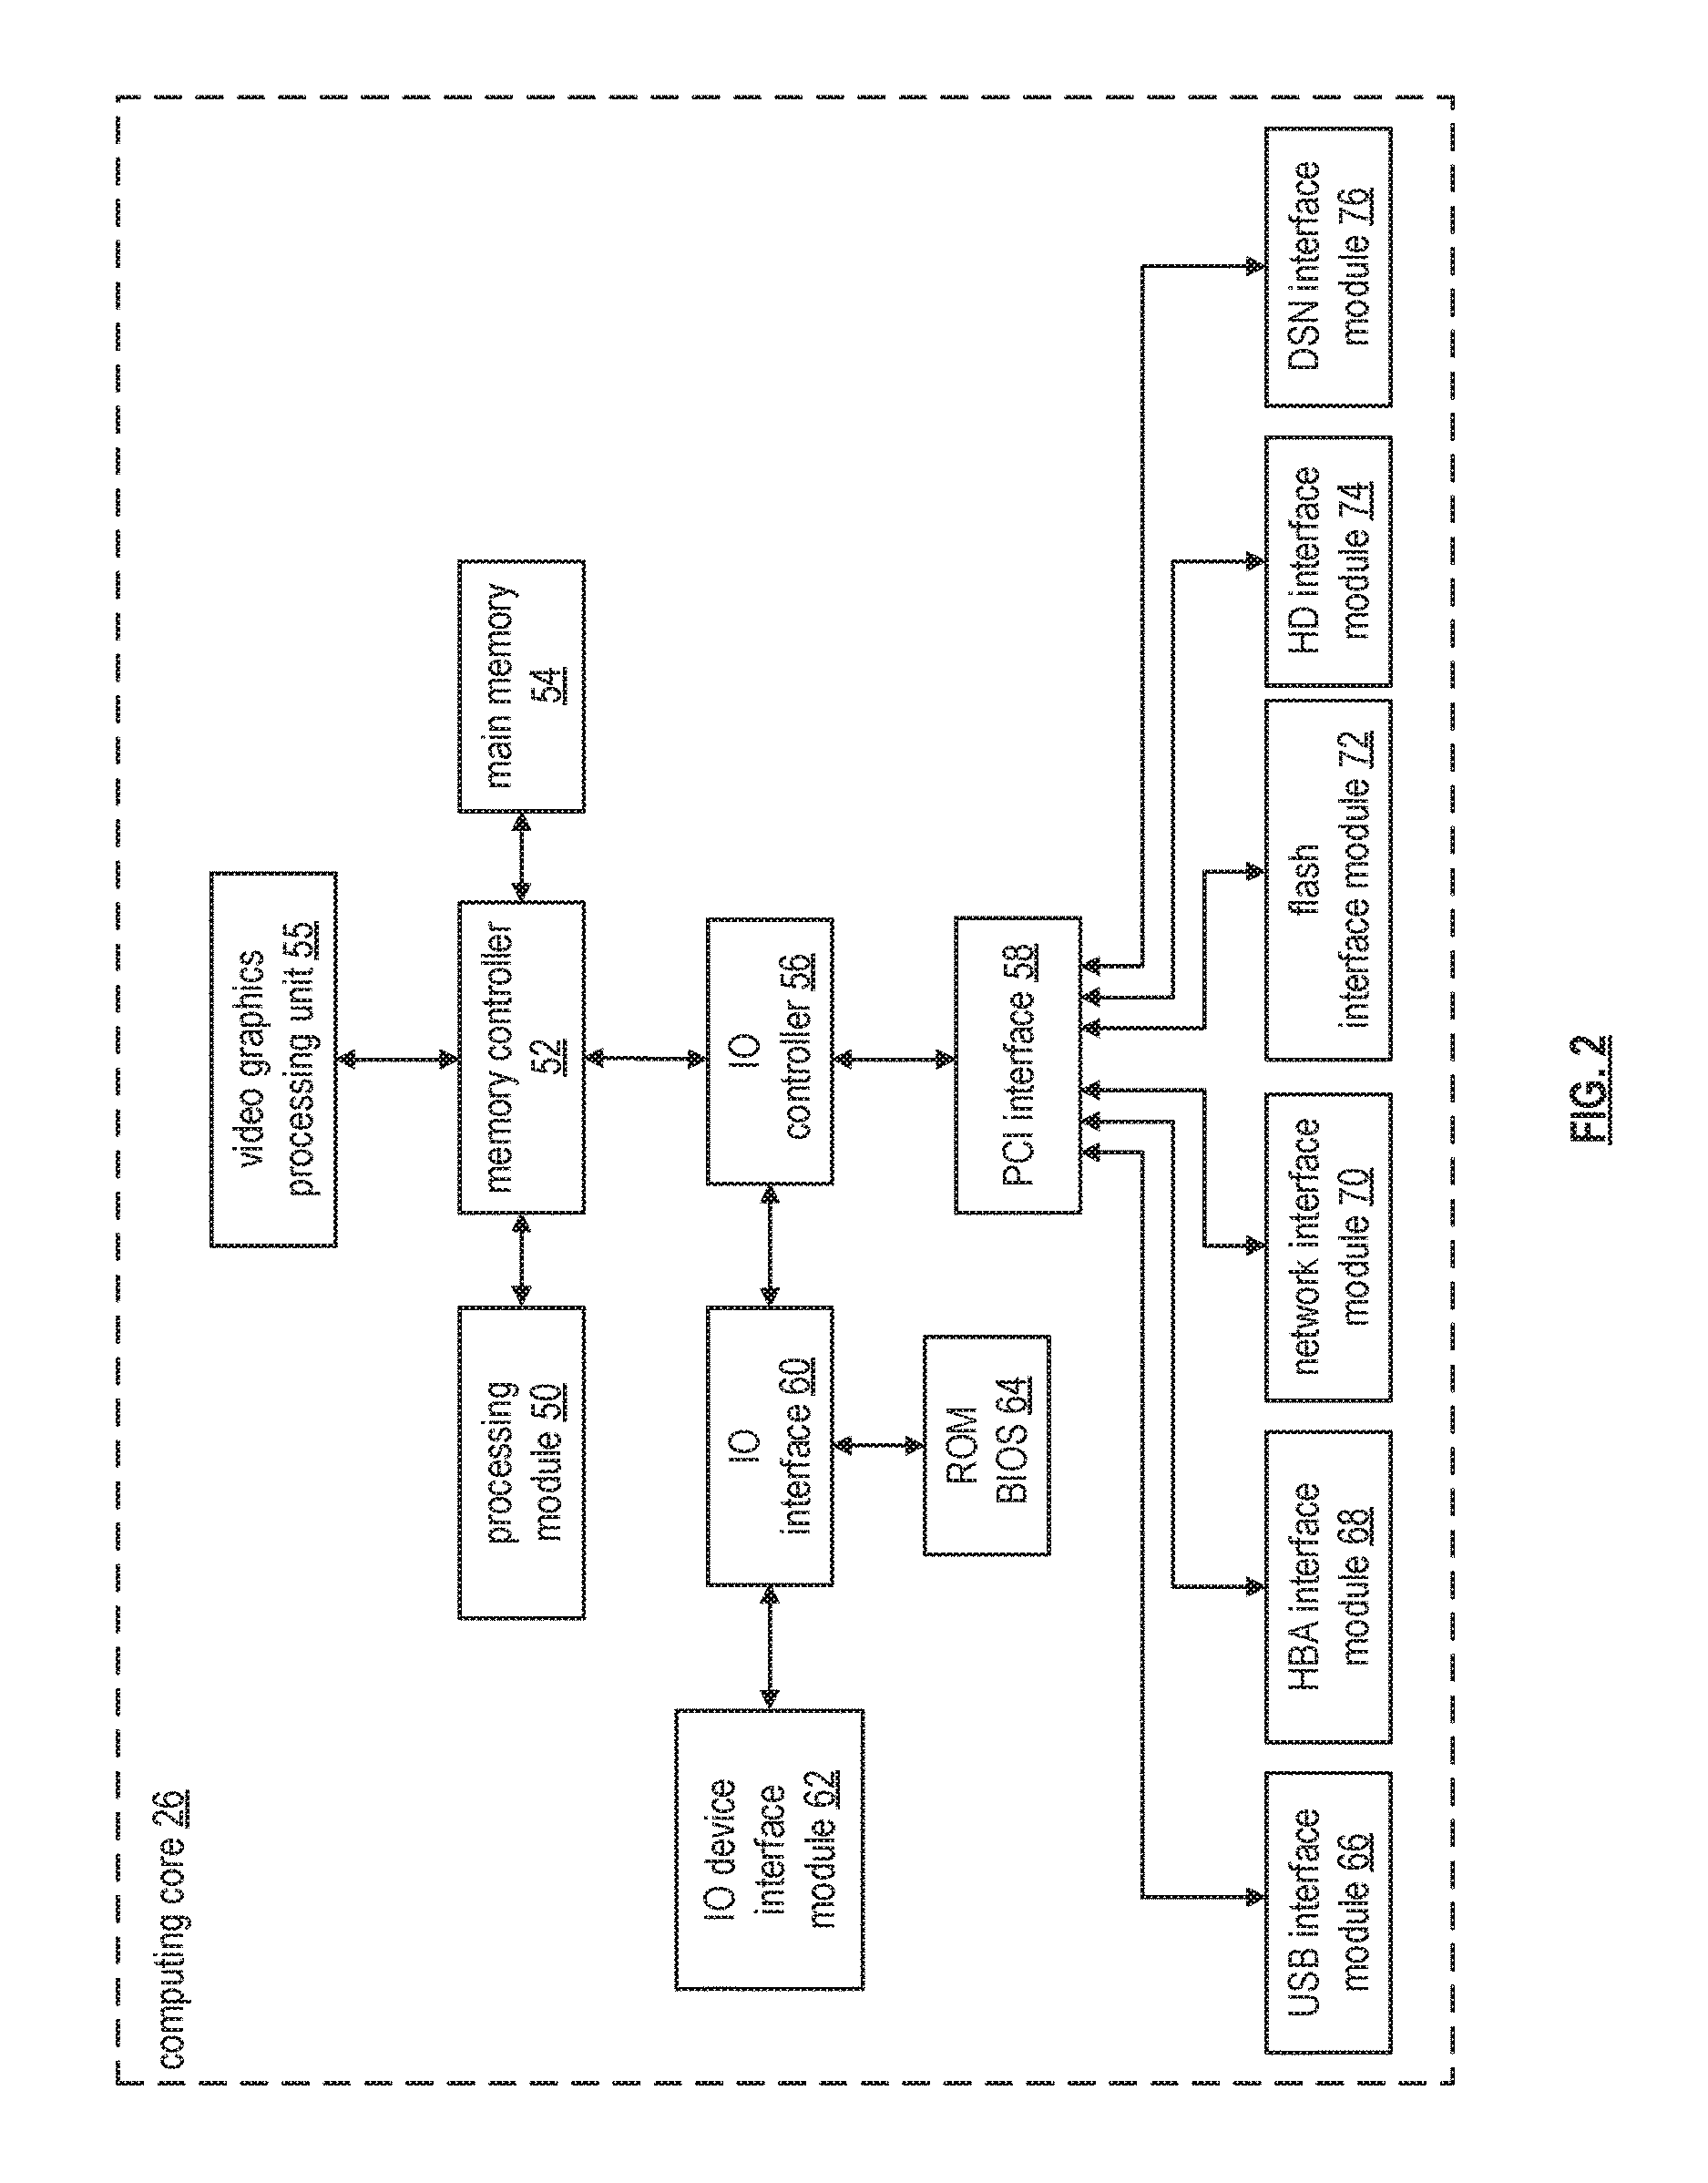 Using broadcast for parallelized and rapid slice replication in a dispersed storage network